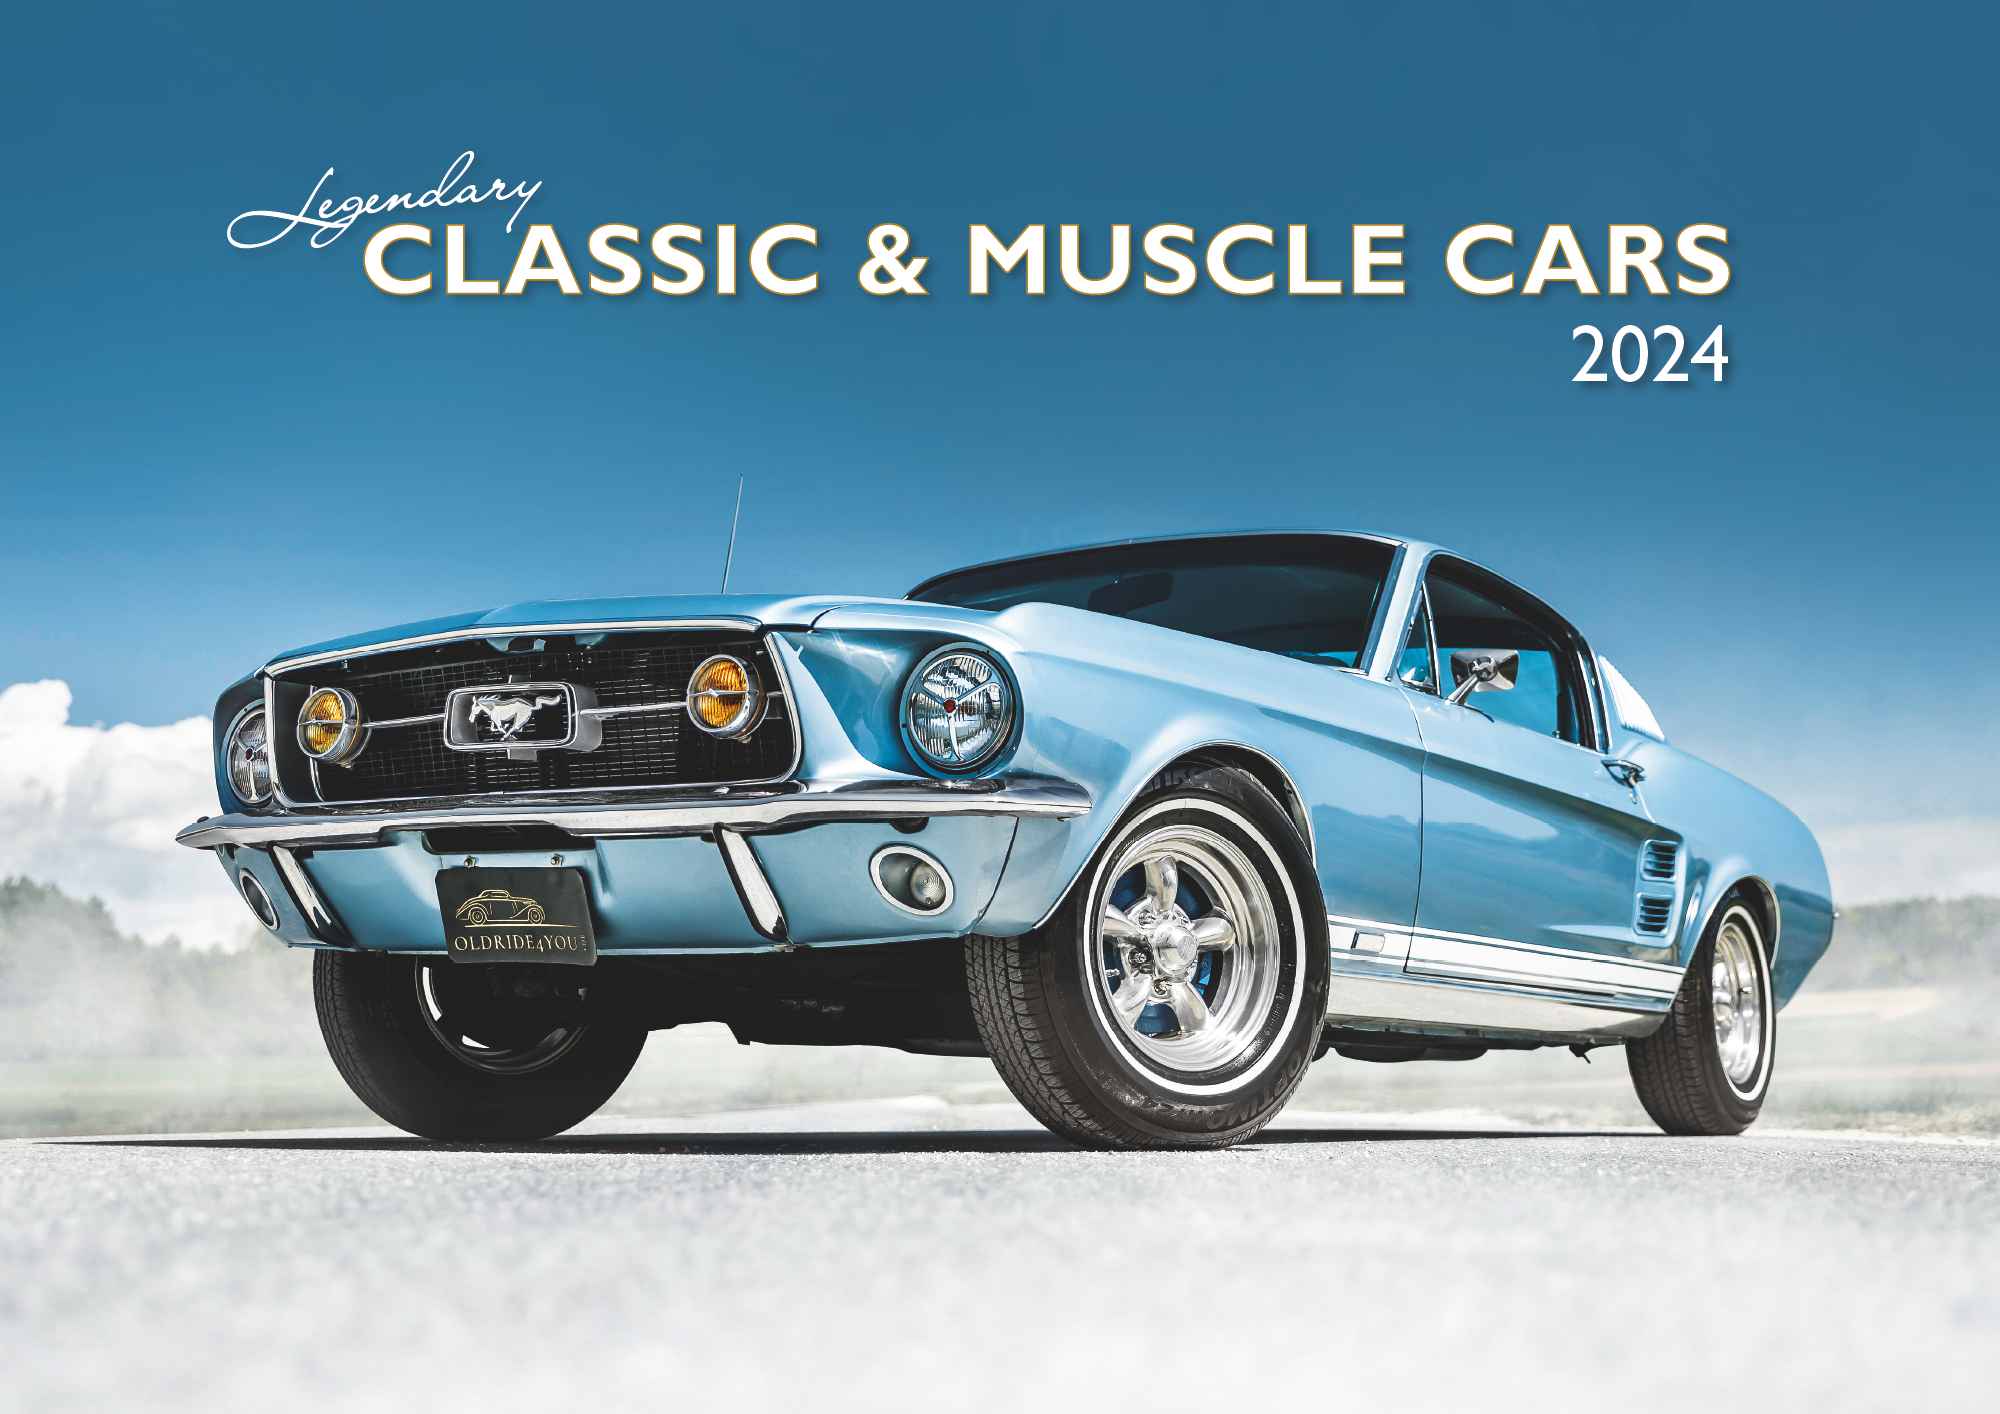 2024 Legendary Classic & Muscle Cars - Deluxe Wall Calendar